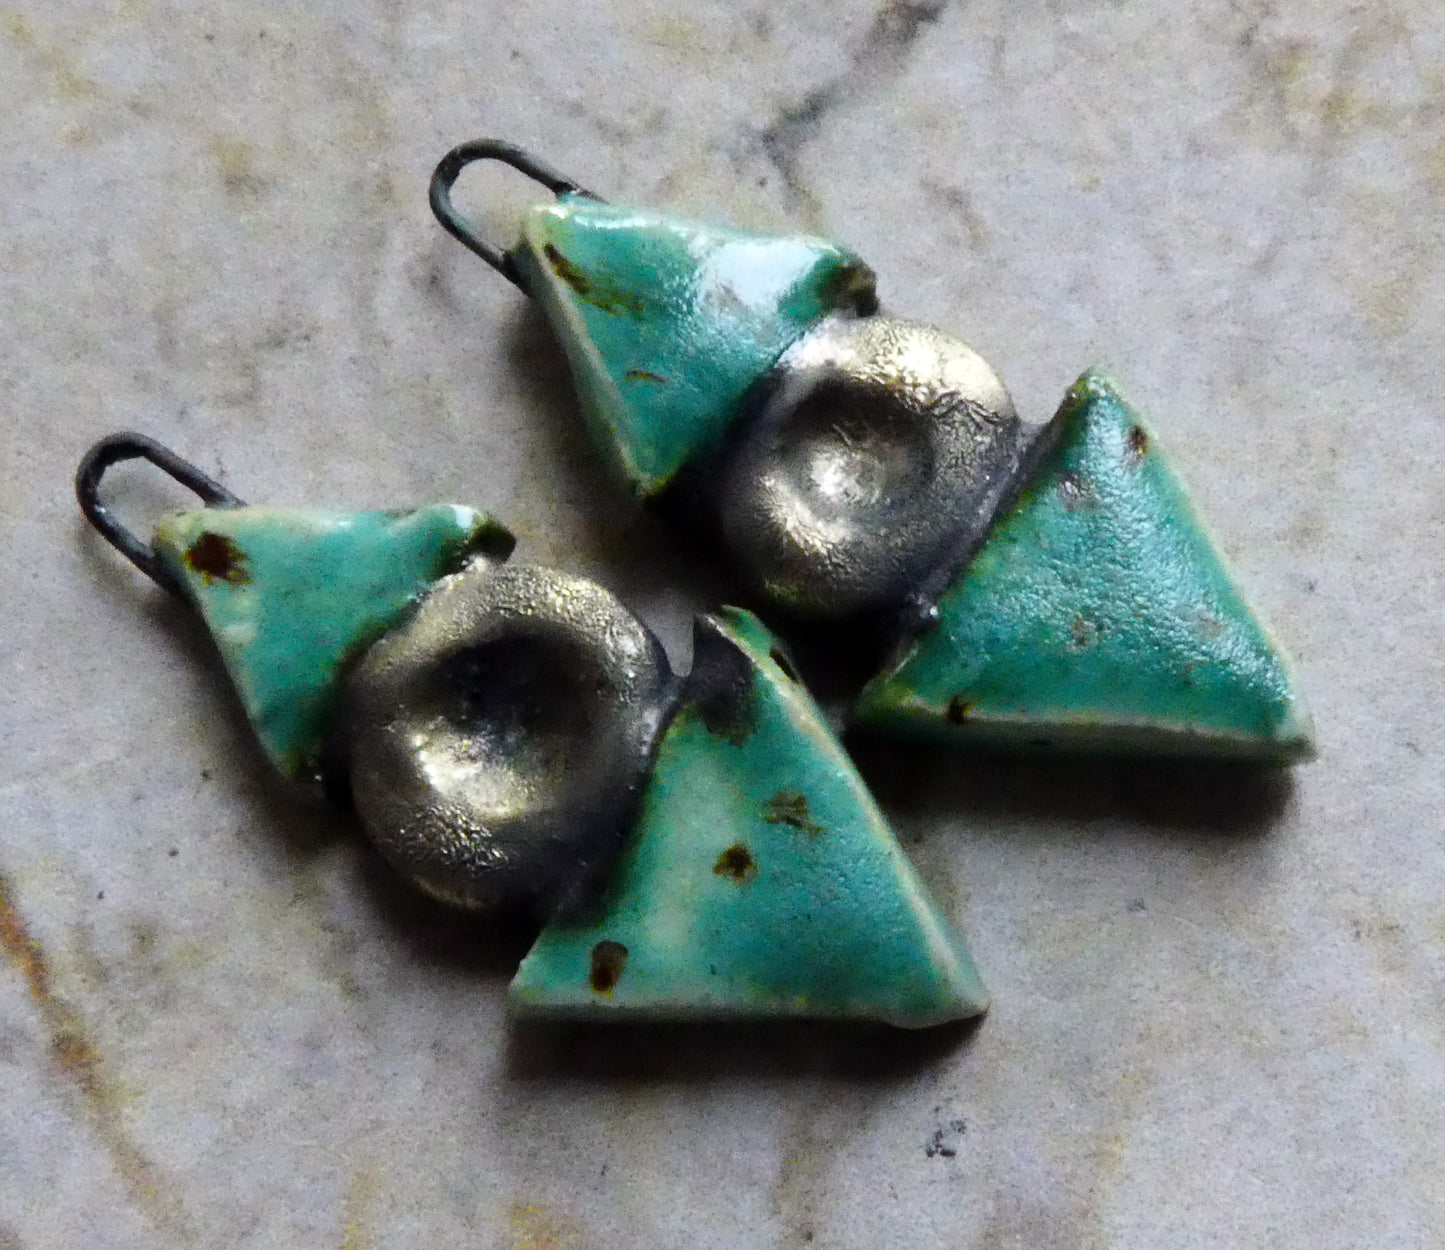 Ceramic Triangle and Disc Earring Charms -Turquoise Sprinkle